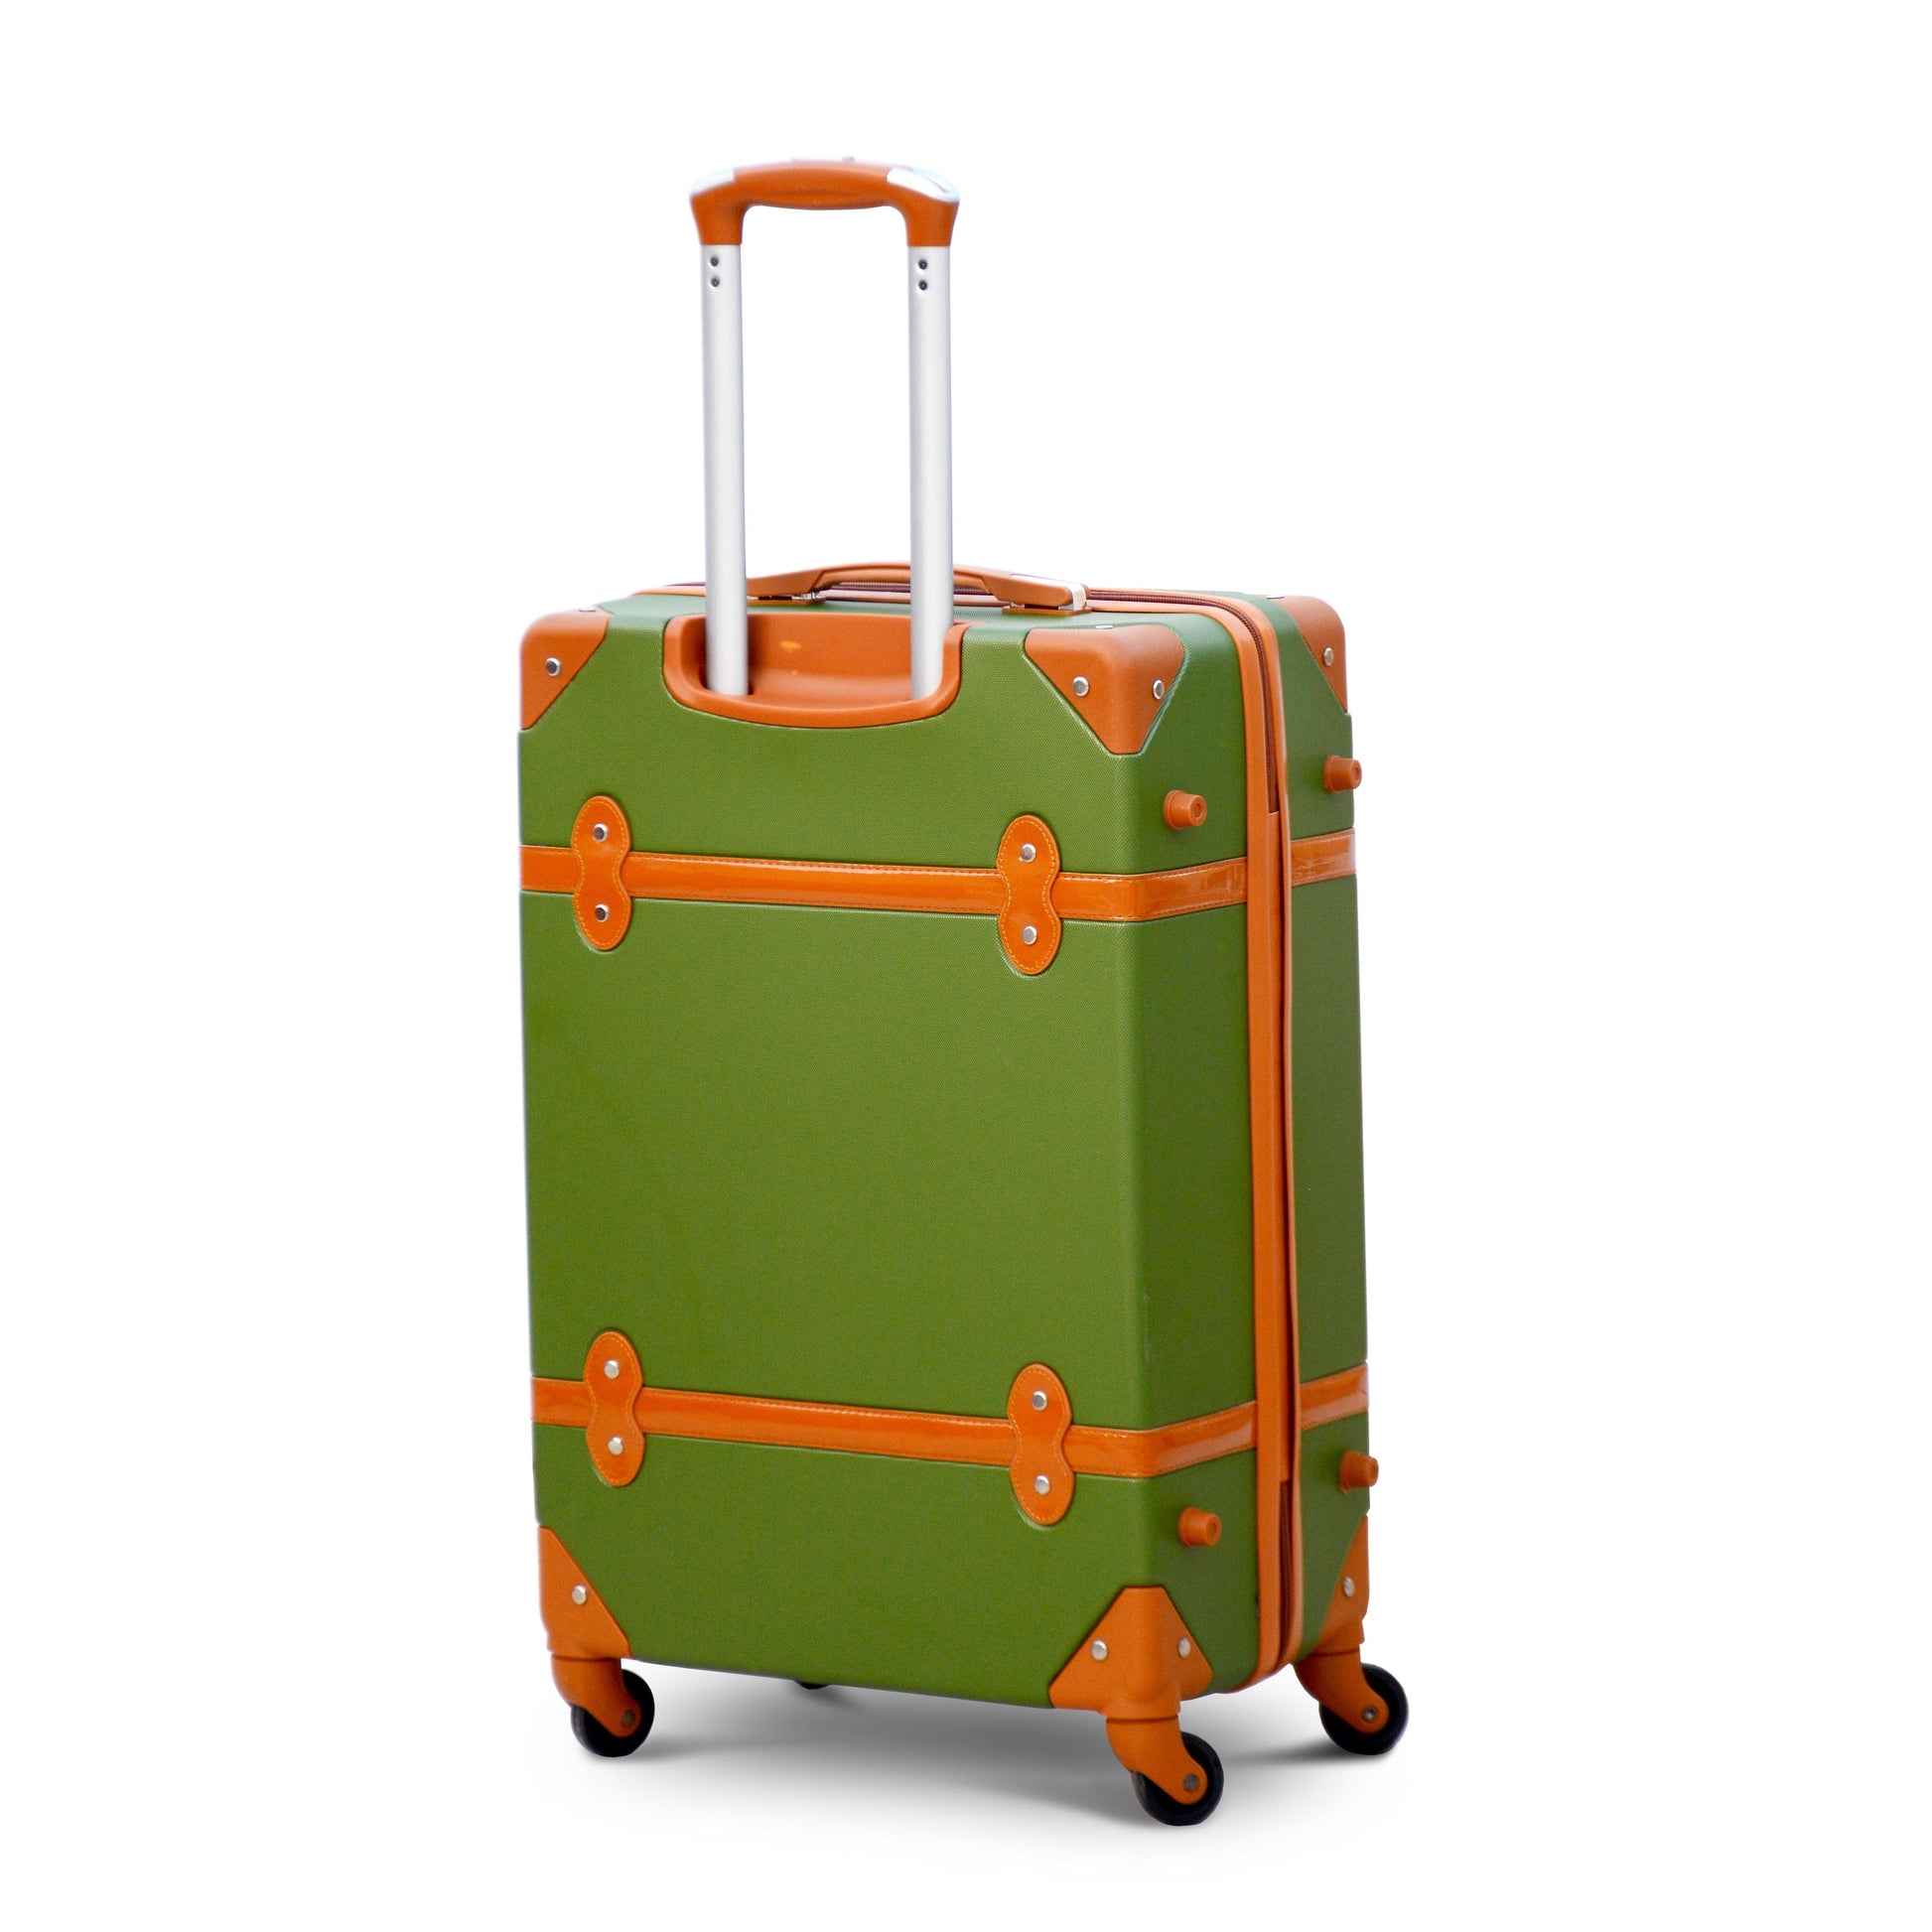 lightweight spinner wheel green luggage corner guard luggage with number lock system